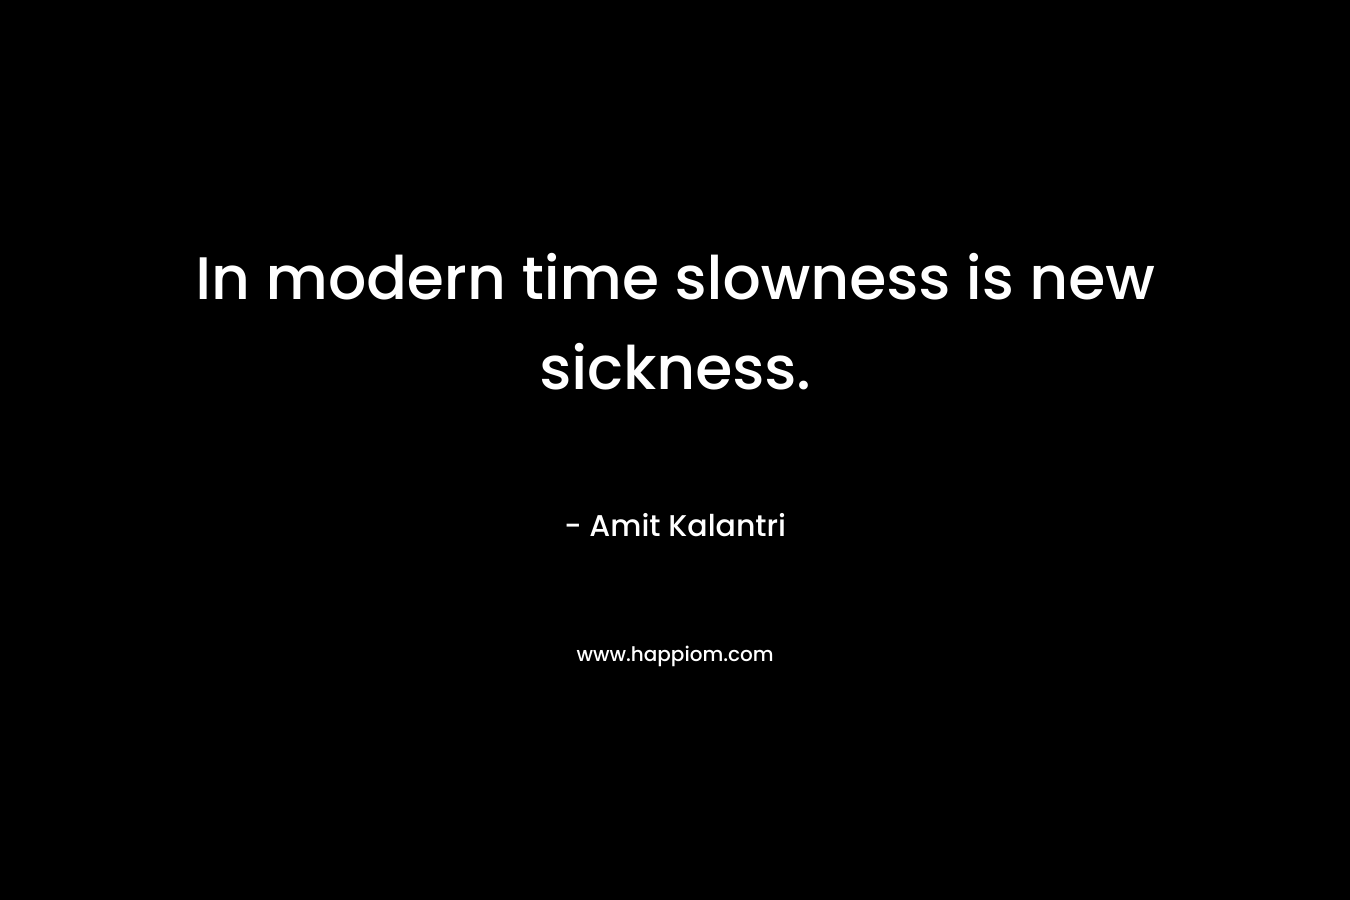 In modern time slowness is new sickness.